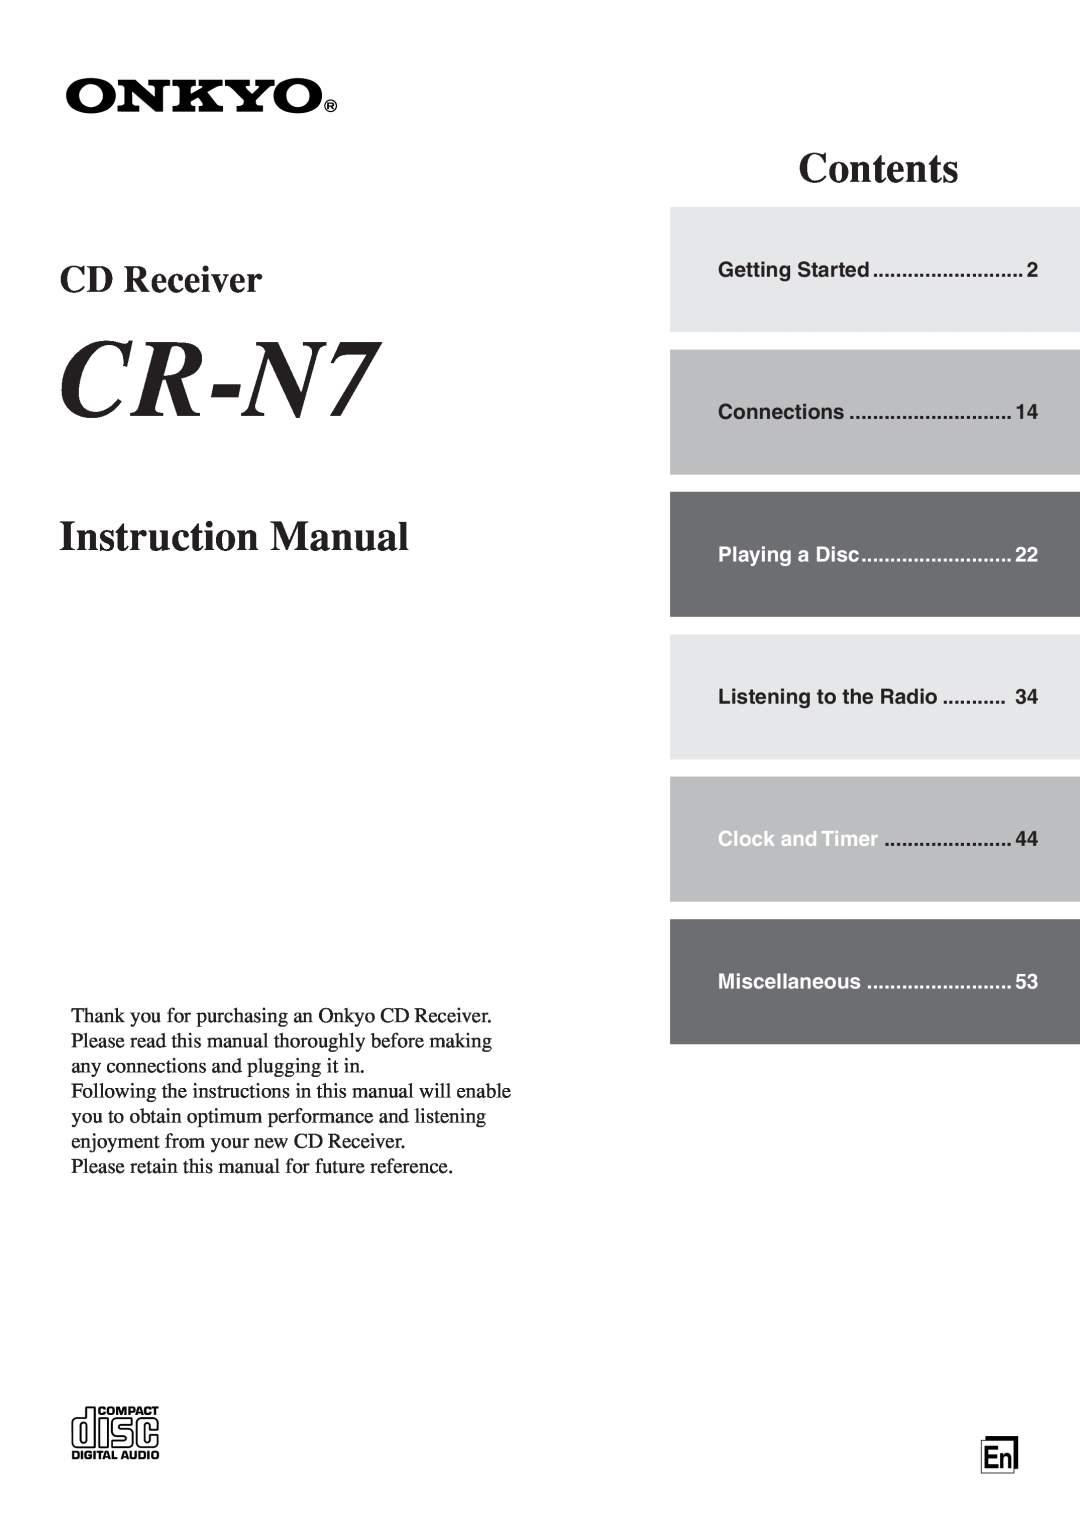 Onkyo CR-N7 instruction manual Listening to the Radio, Contents, CD Receiver 